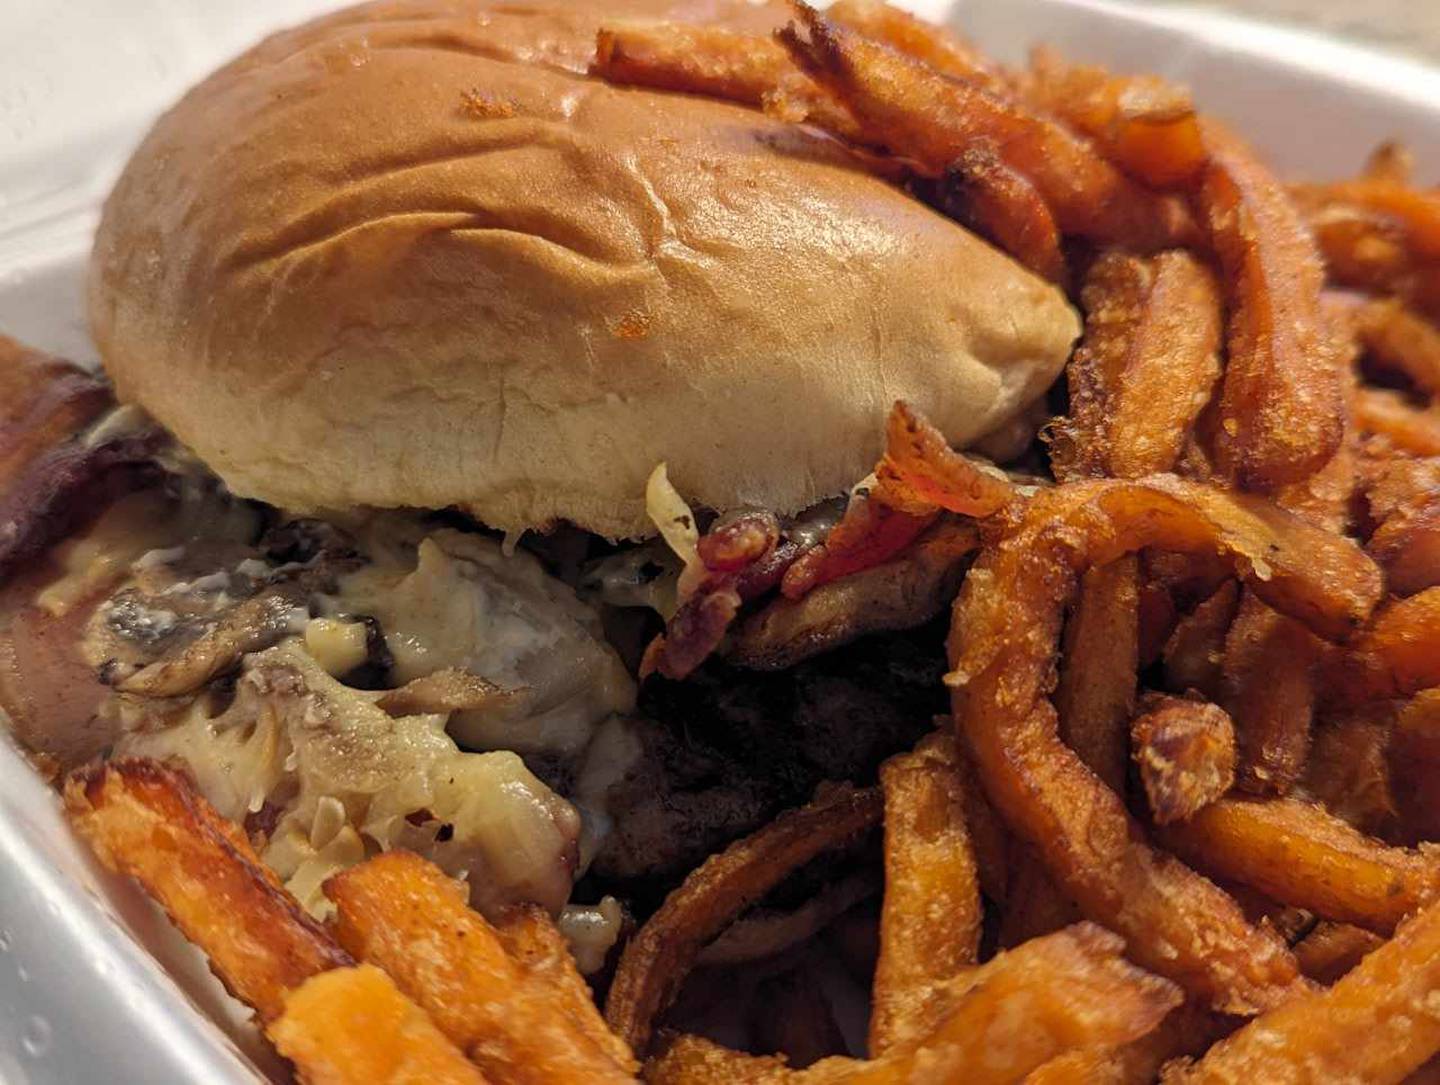 The Dang Burger at the Southern Cafe in Crest Hill was a bacon mushroom burger with gouda cheese and remoulade sauce. A side order of sweet potato fries accompanied it.